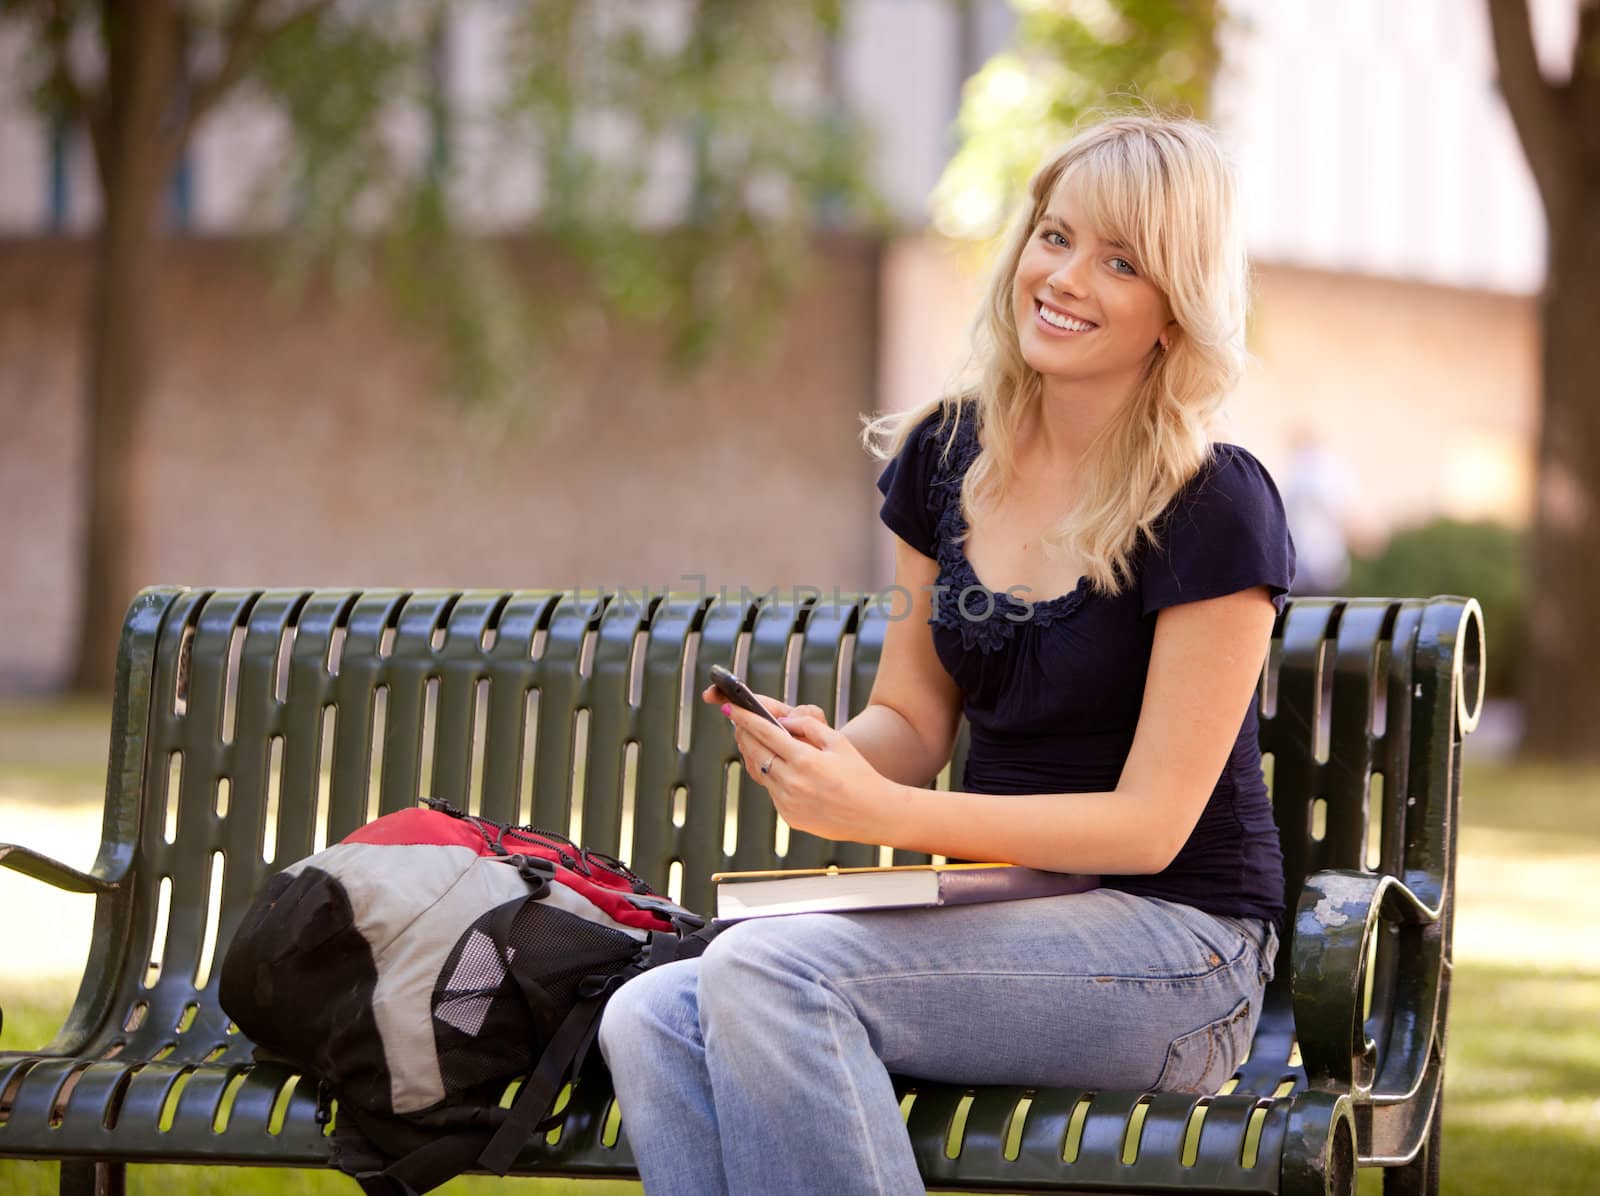 Friendly young female student sitting on a bench sending a text message